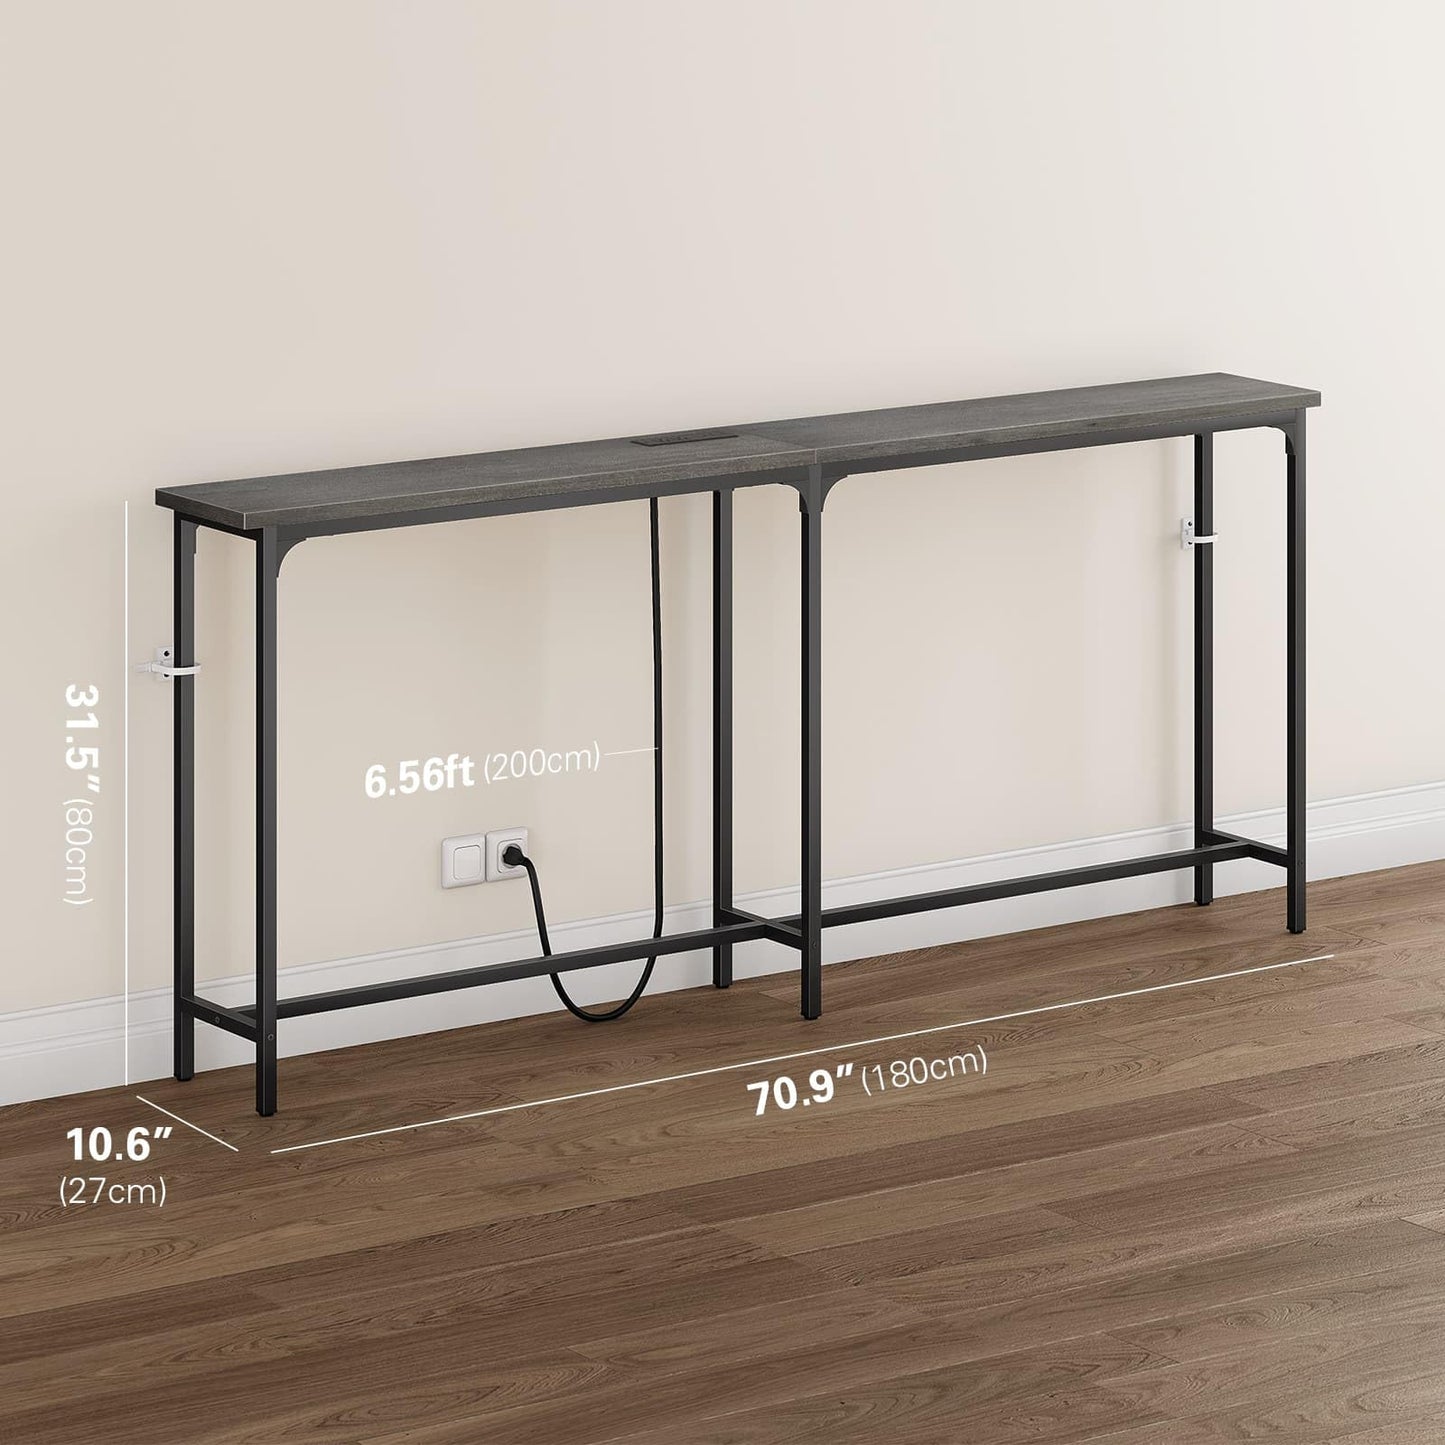 70 Inch Sofa Table with 2 Outlets and 1 Type C Port and 1 USB Port, Behind Couch Table 10.6” D x 70.9” L x 31.5” H, Extra-Long Console Table, Narrow Long Entryway Table - Grey